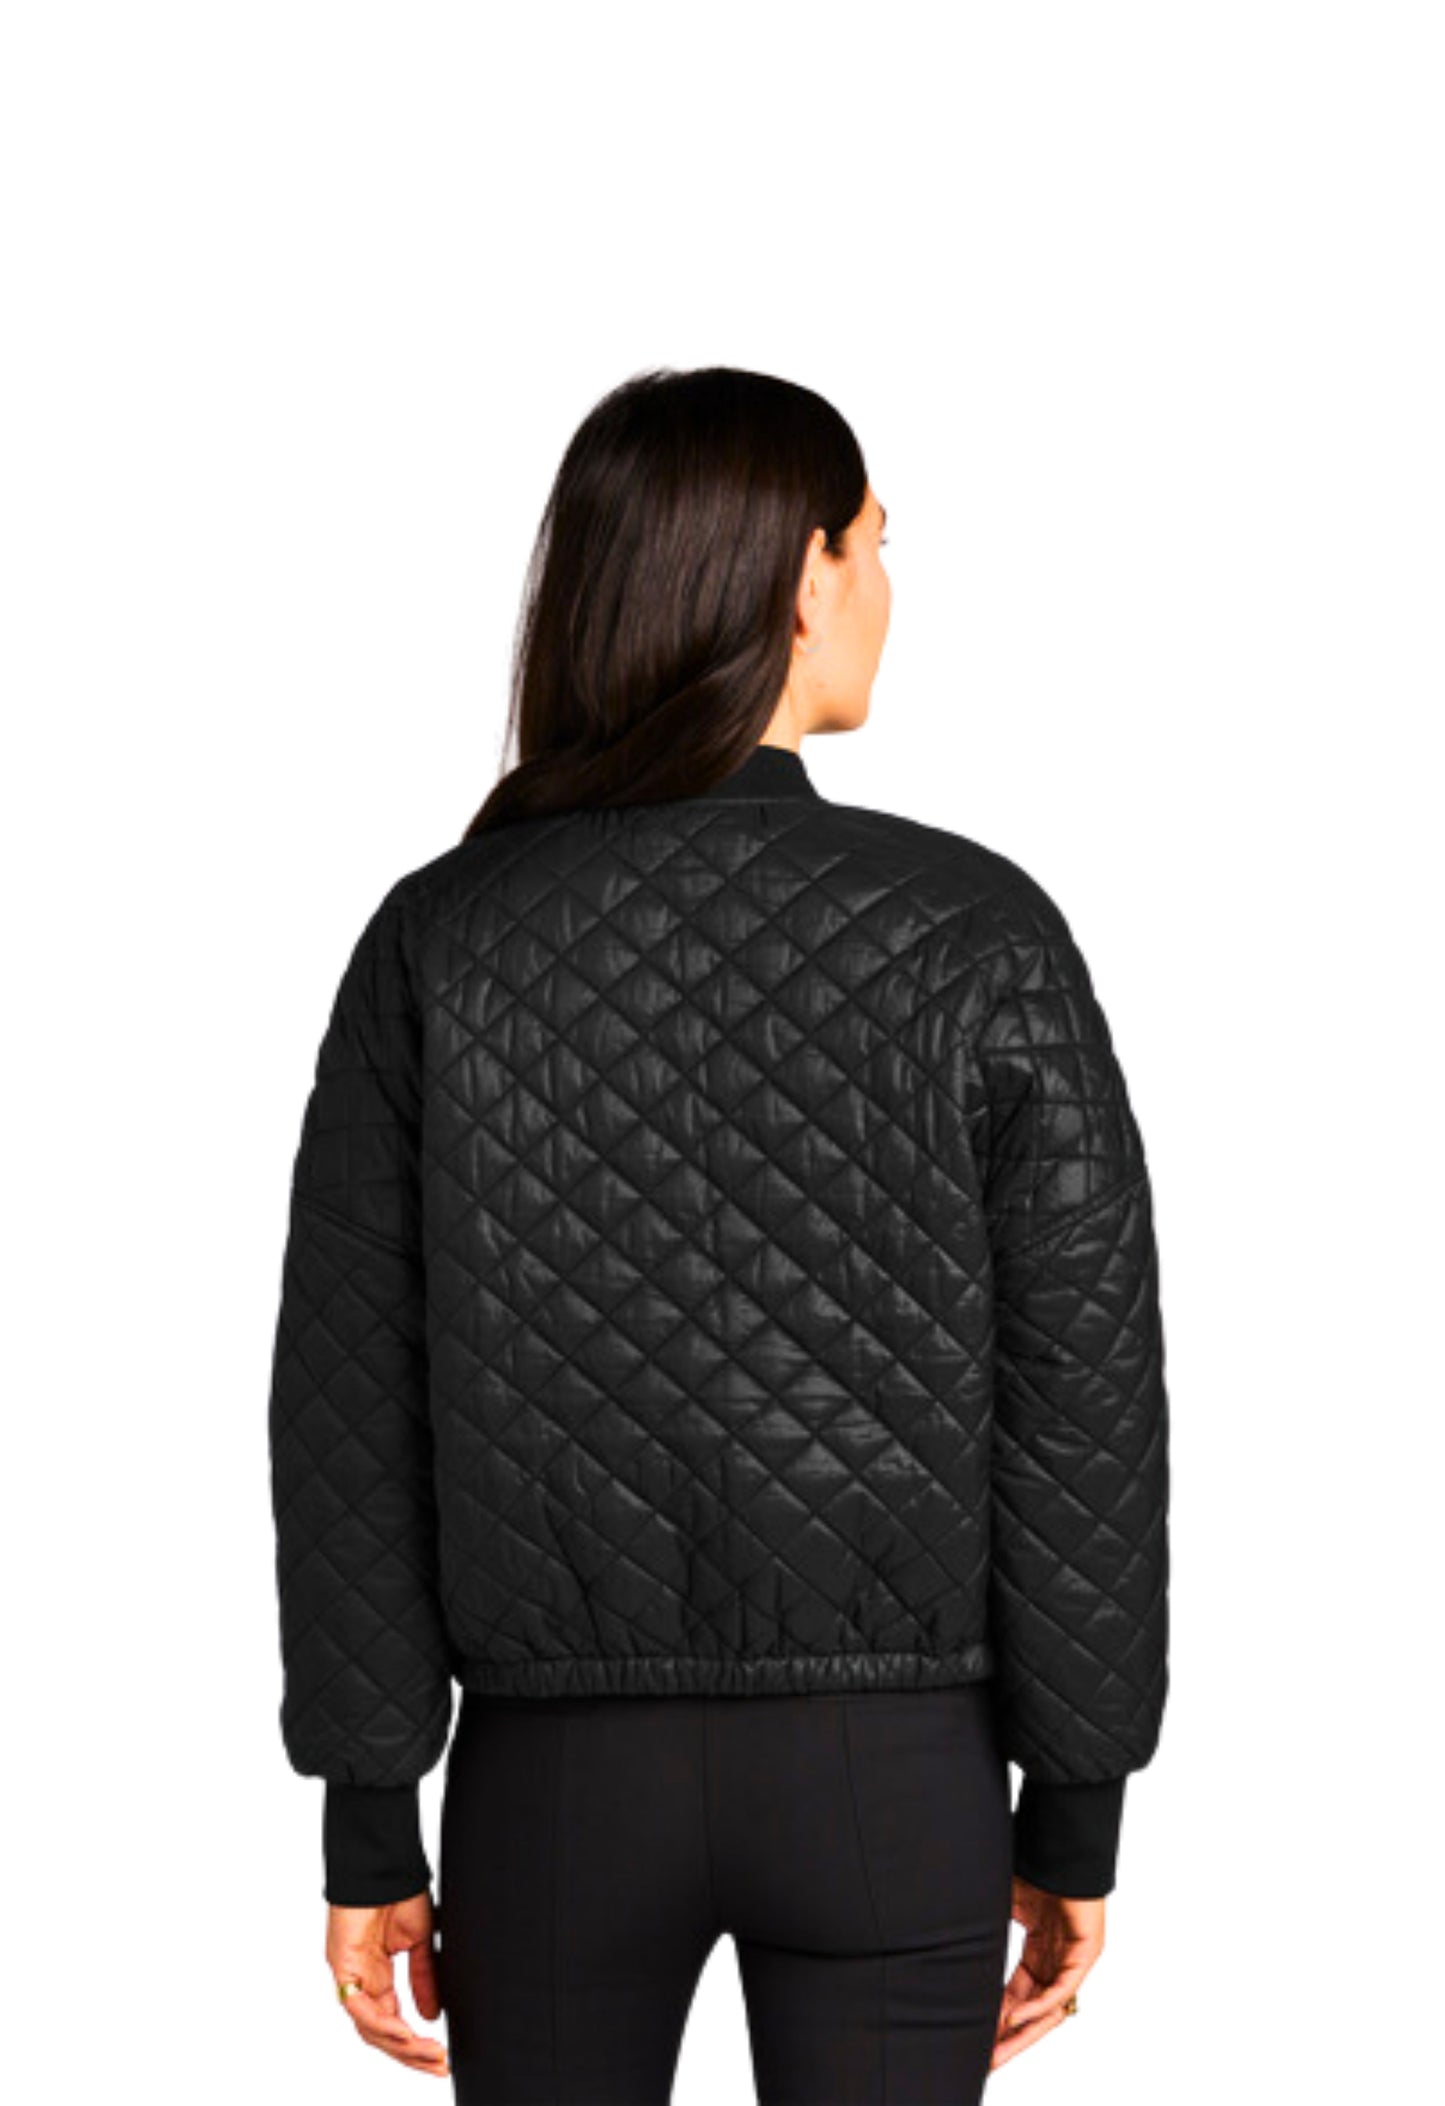 Timeless Temptations Women's Quilted Jacket